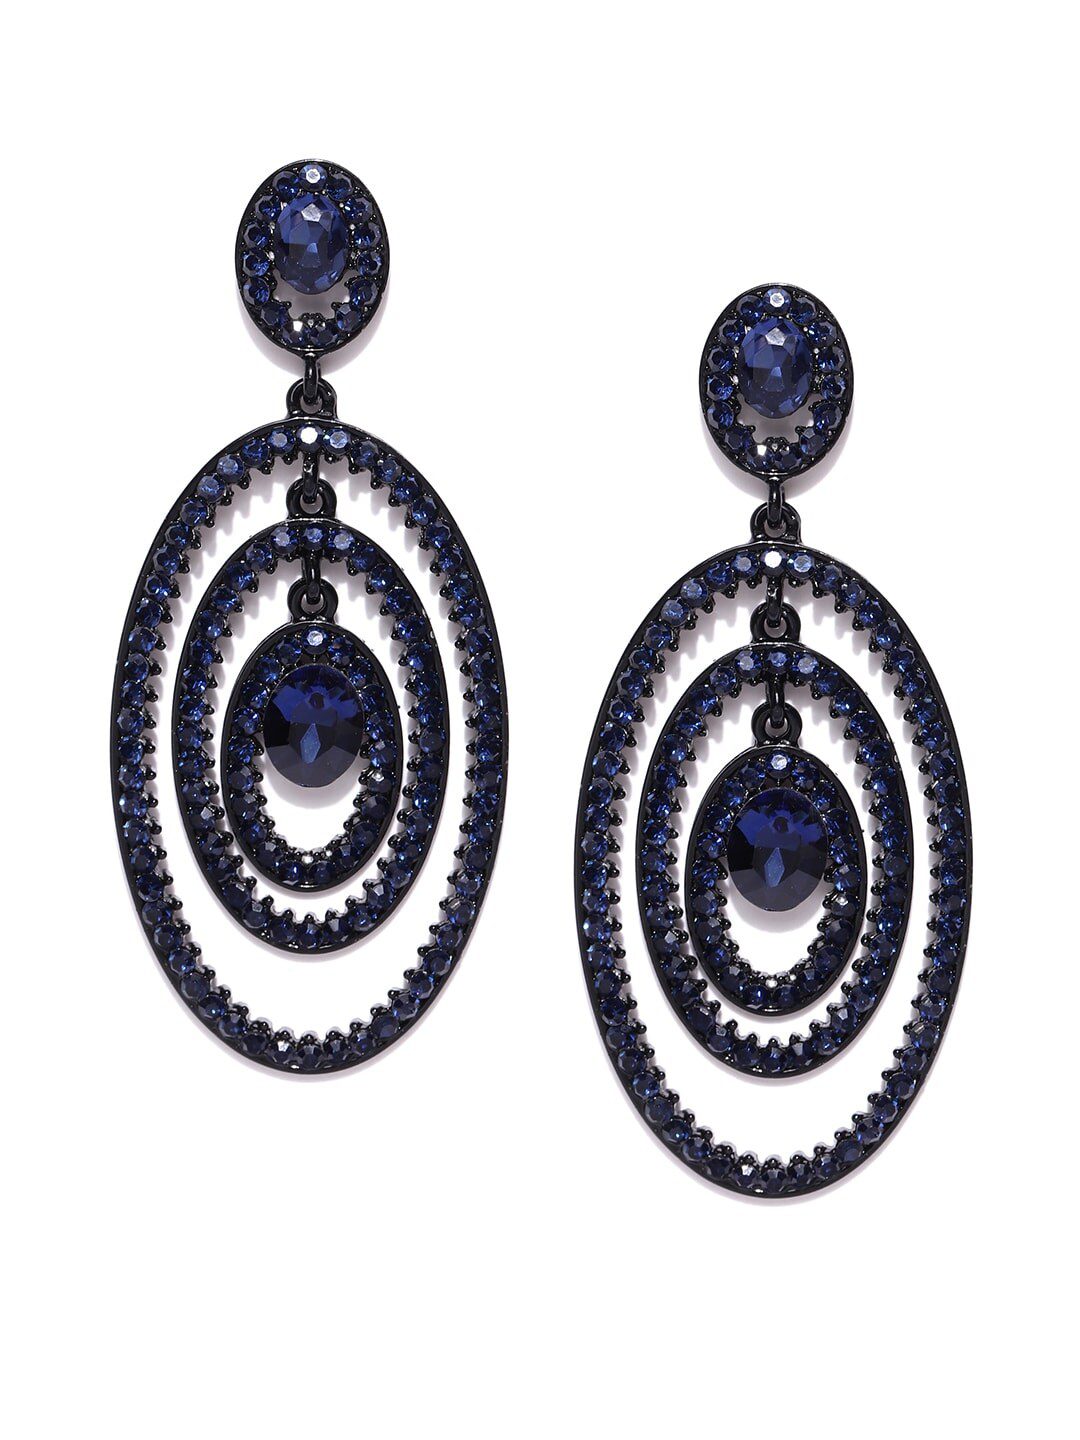 TANLOOMS Navy Blue Color Attractive Round Design Gola Stone Party Earrings-tmf.edu.vn